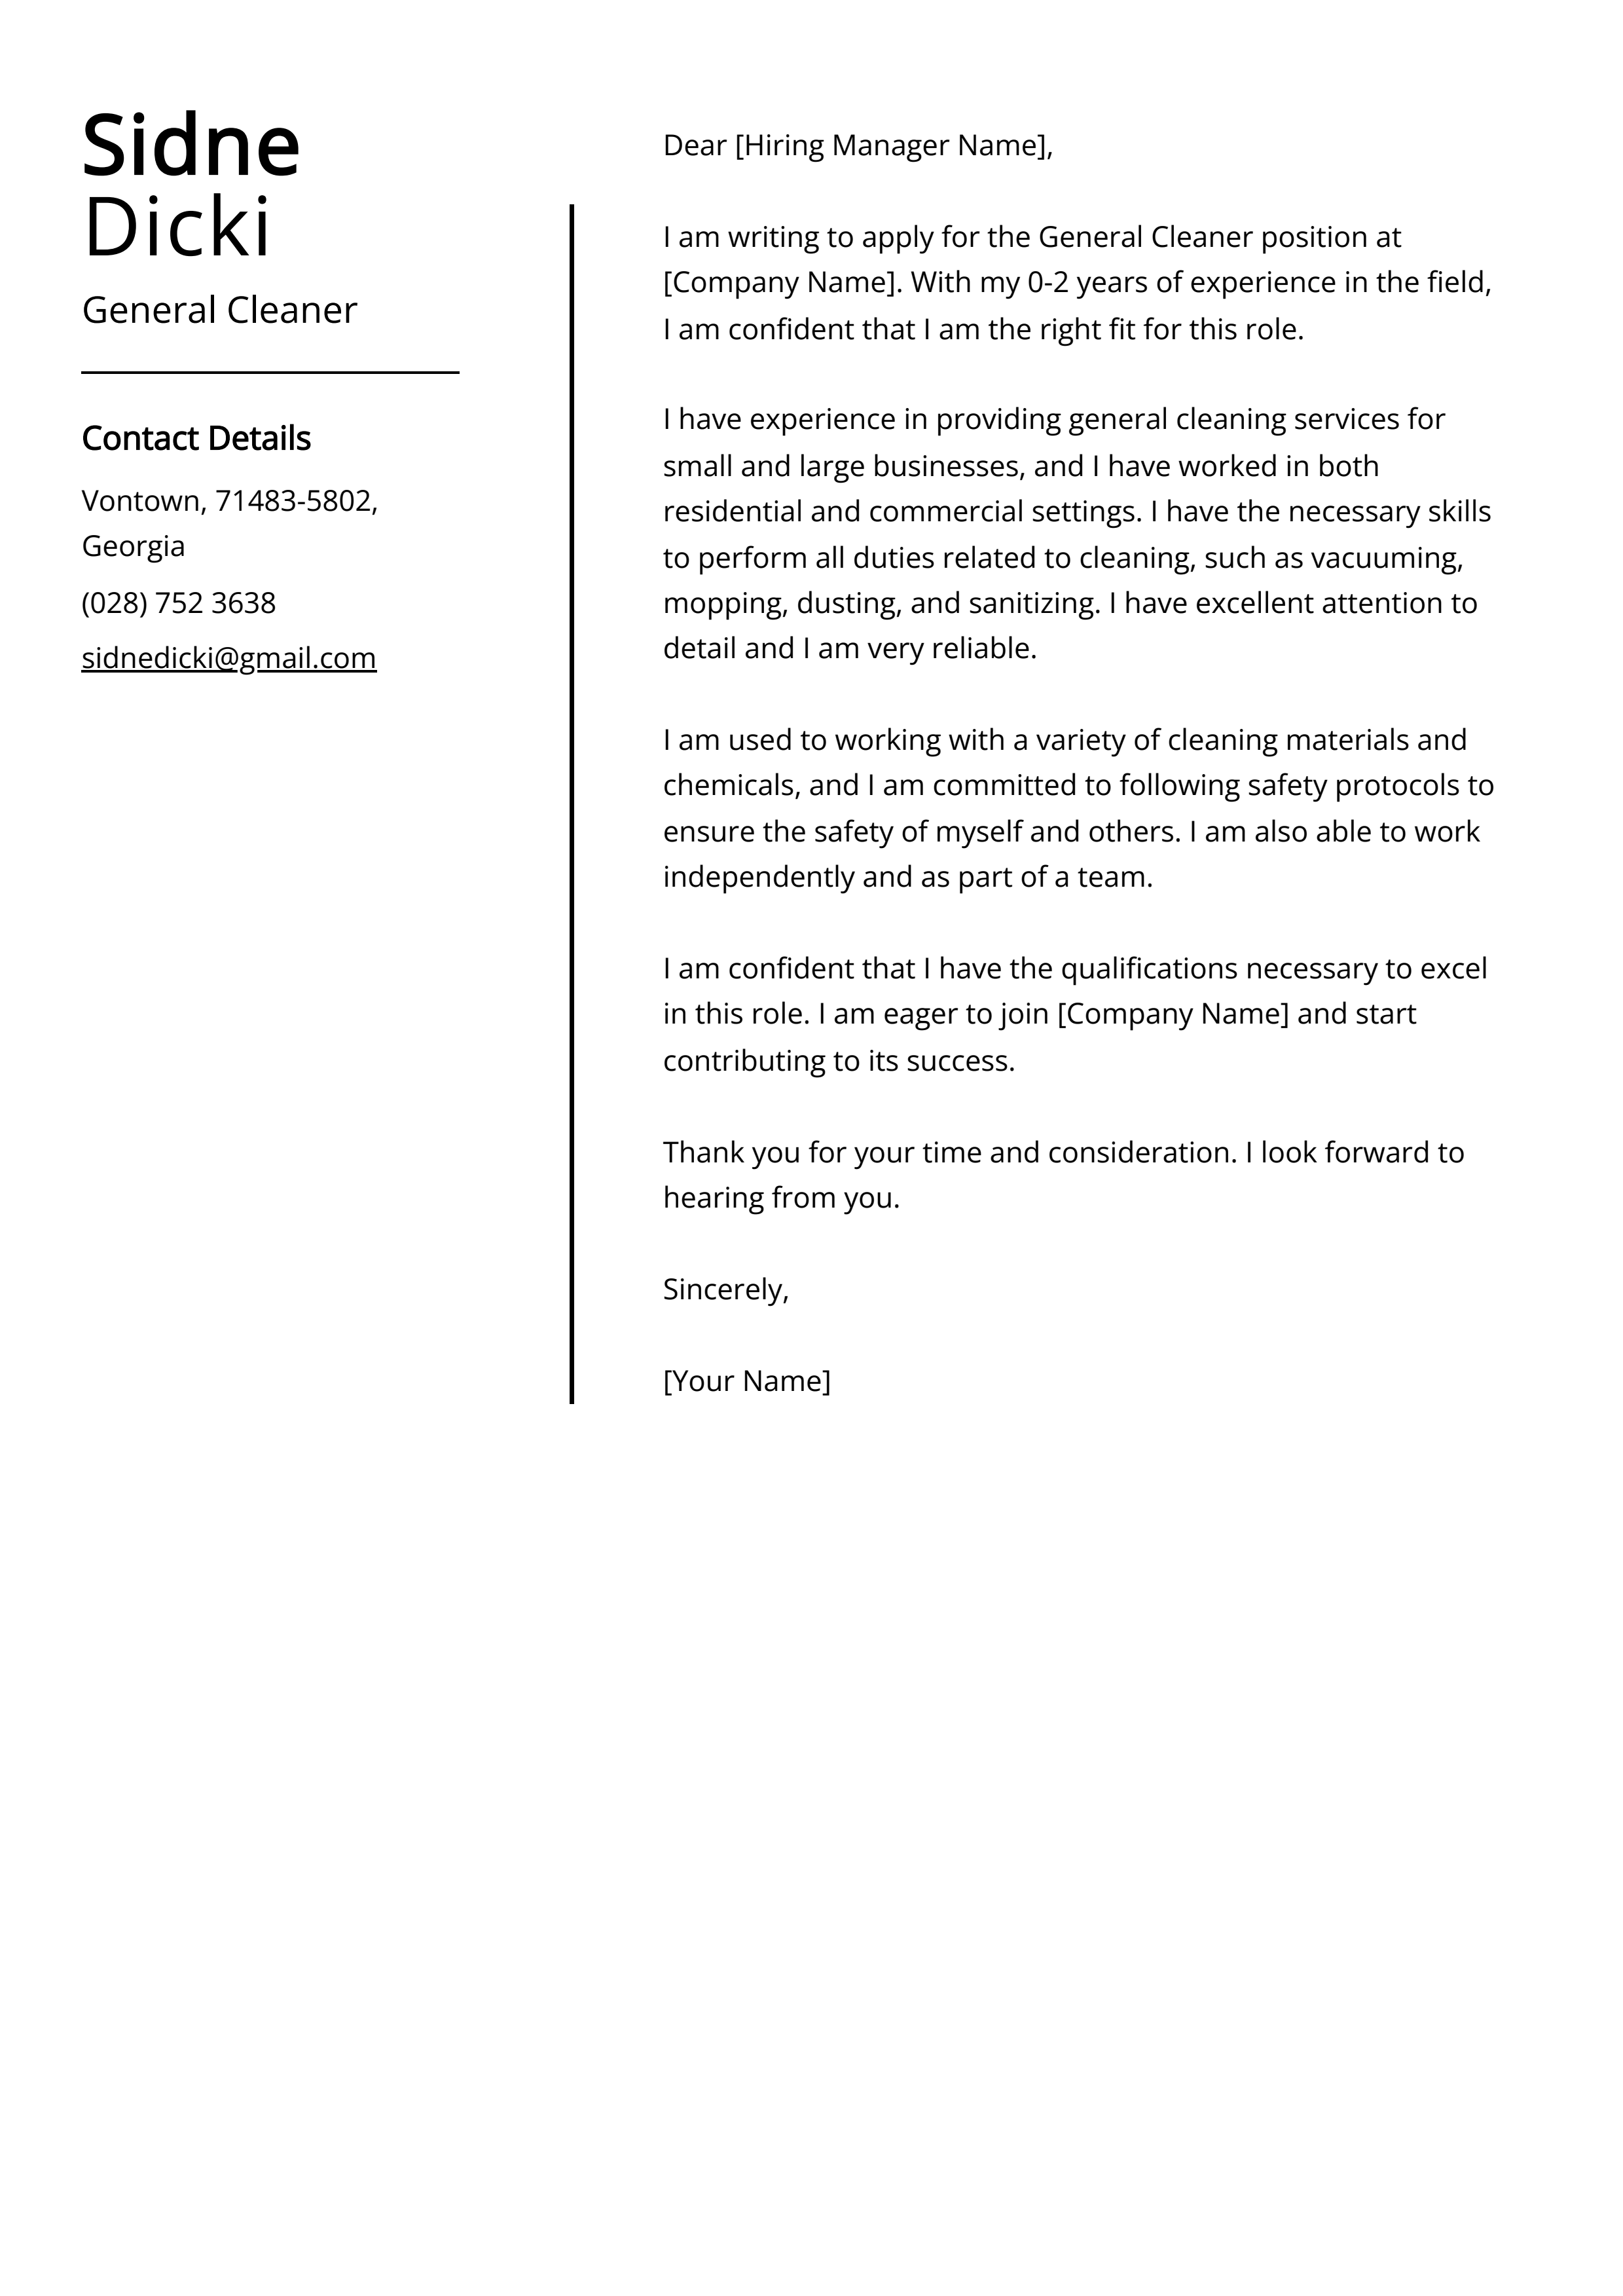 General Cleaner Cover Letter Example